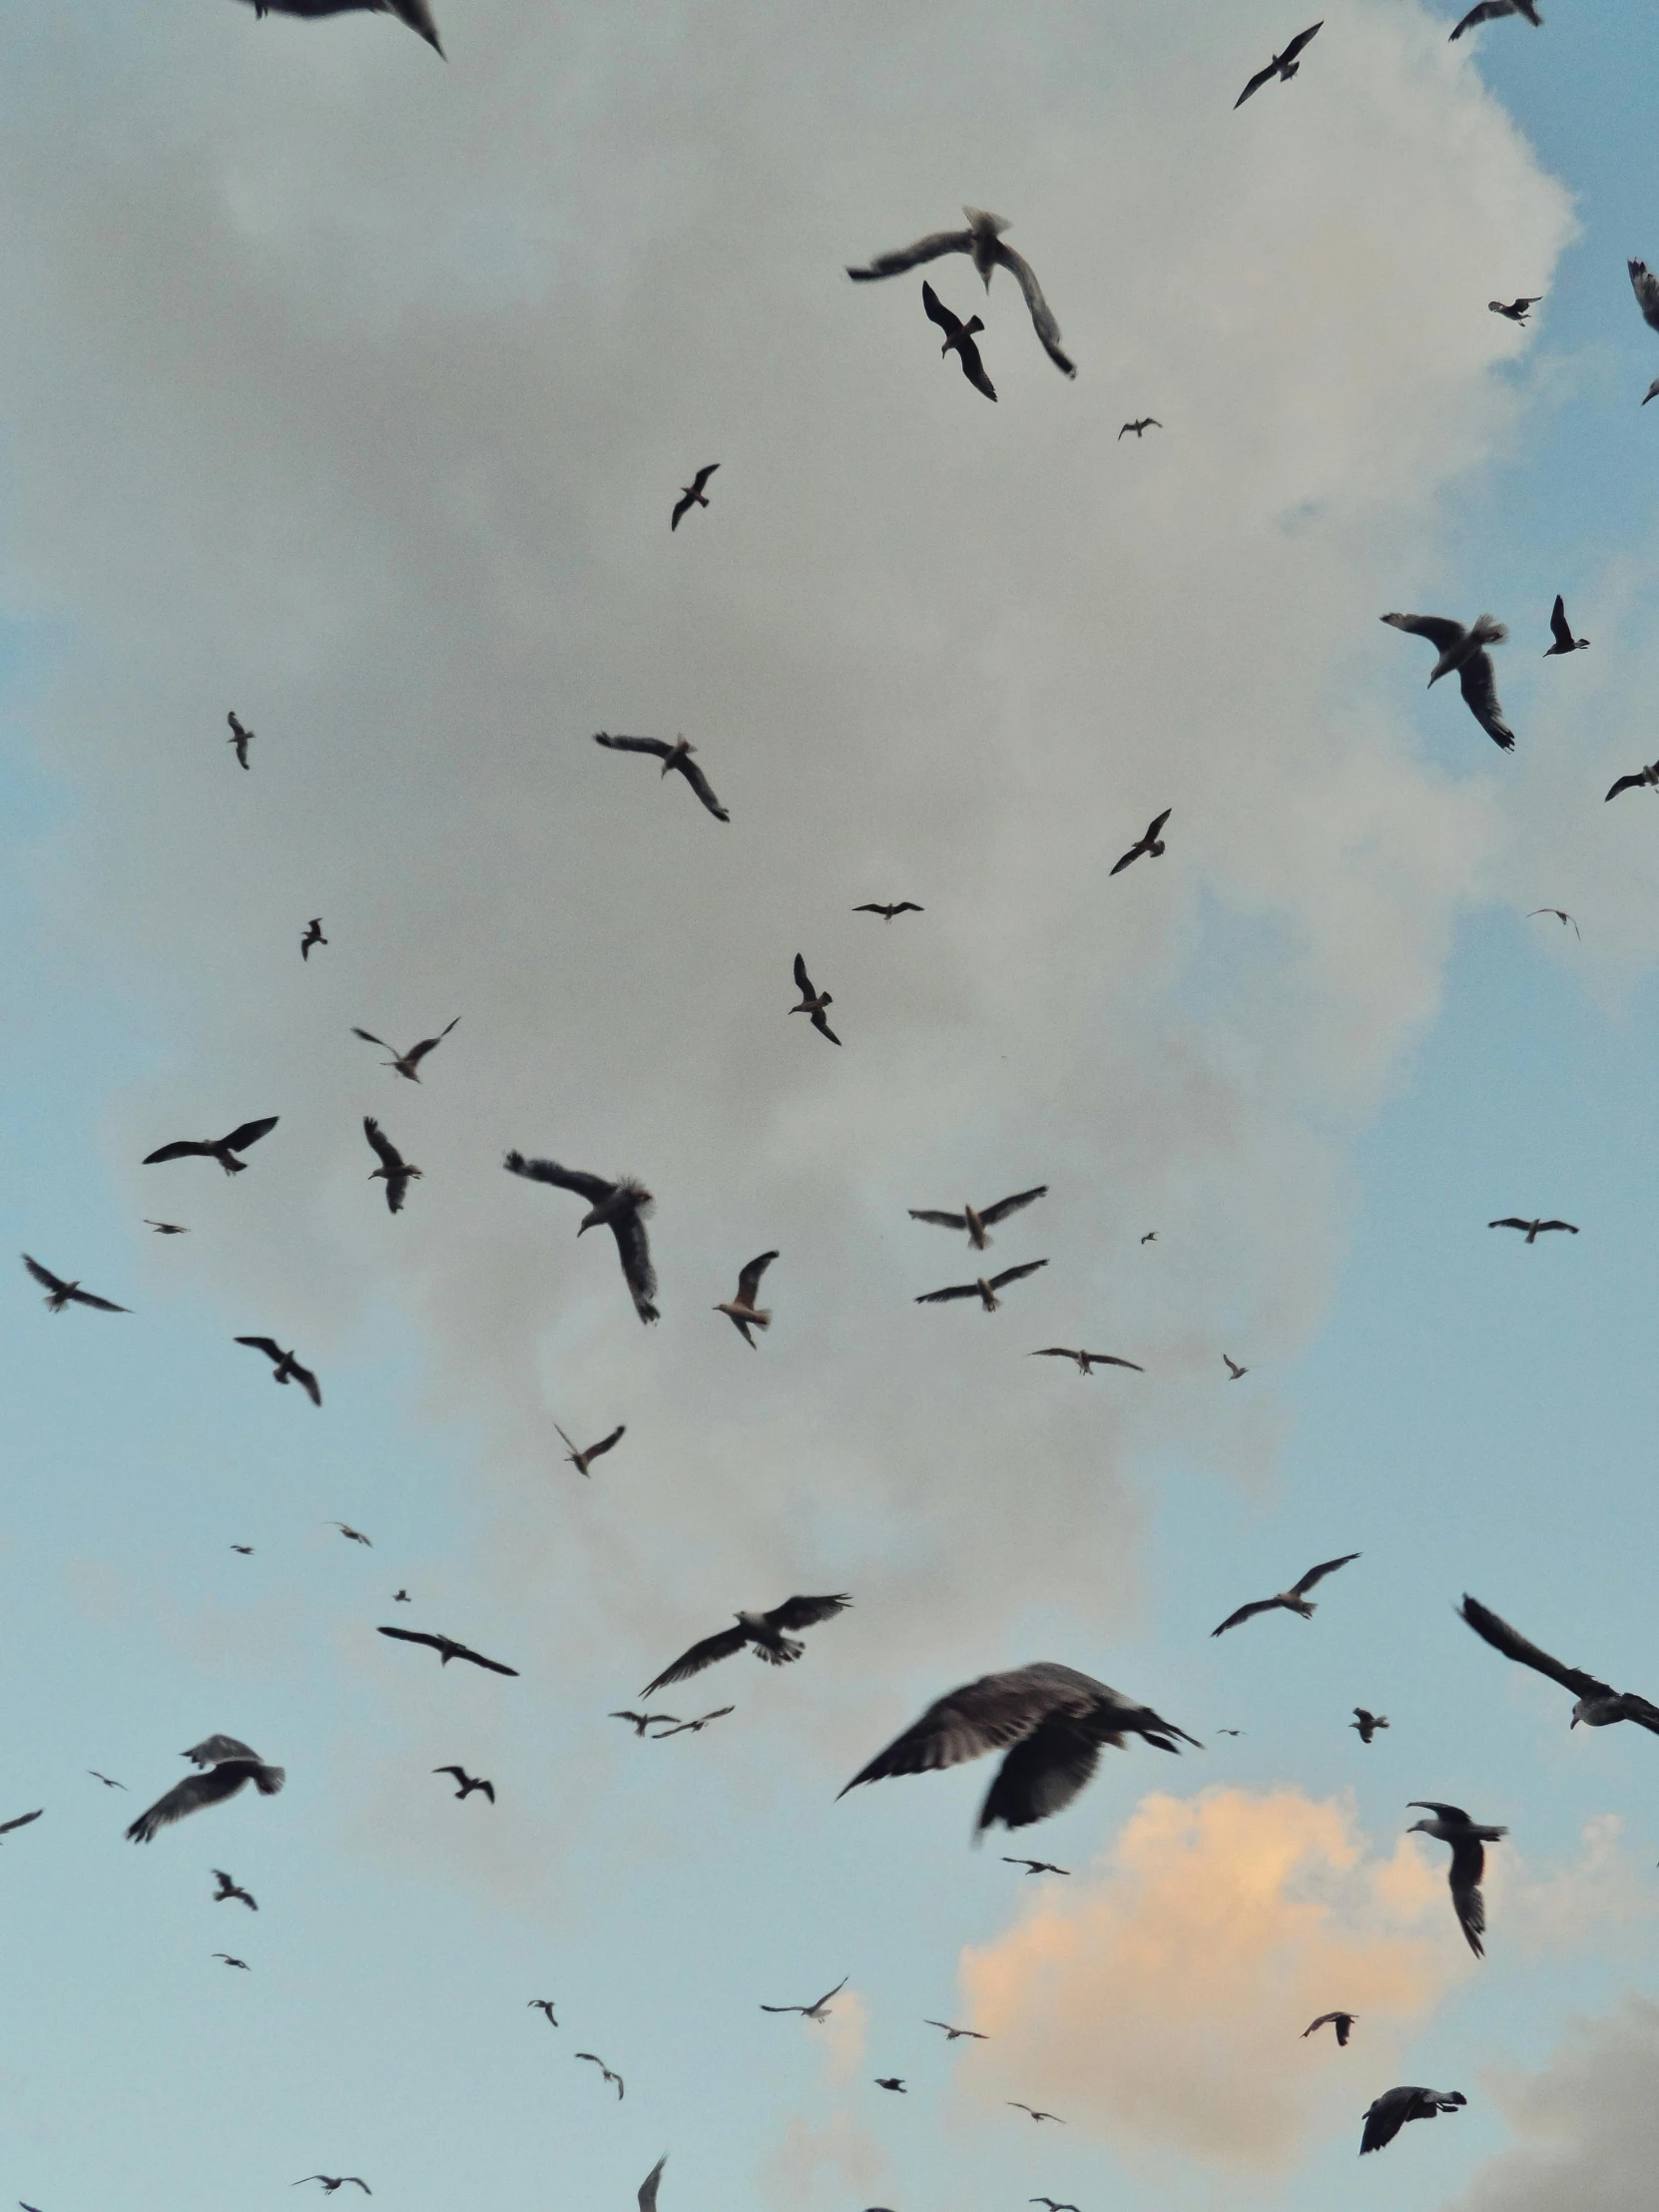 several large birds are flying in the sky